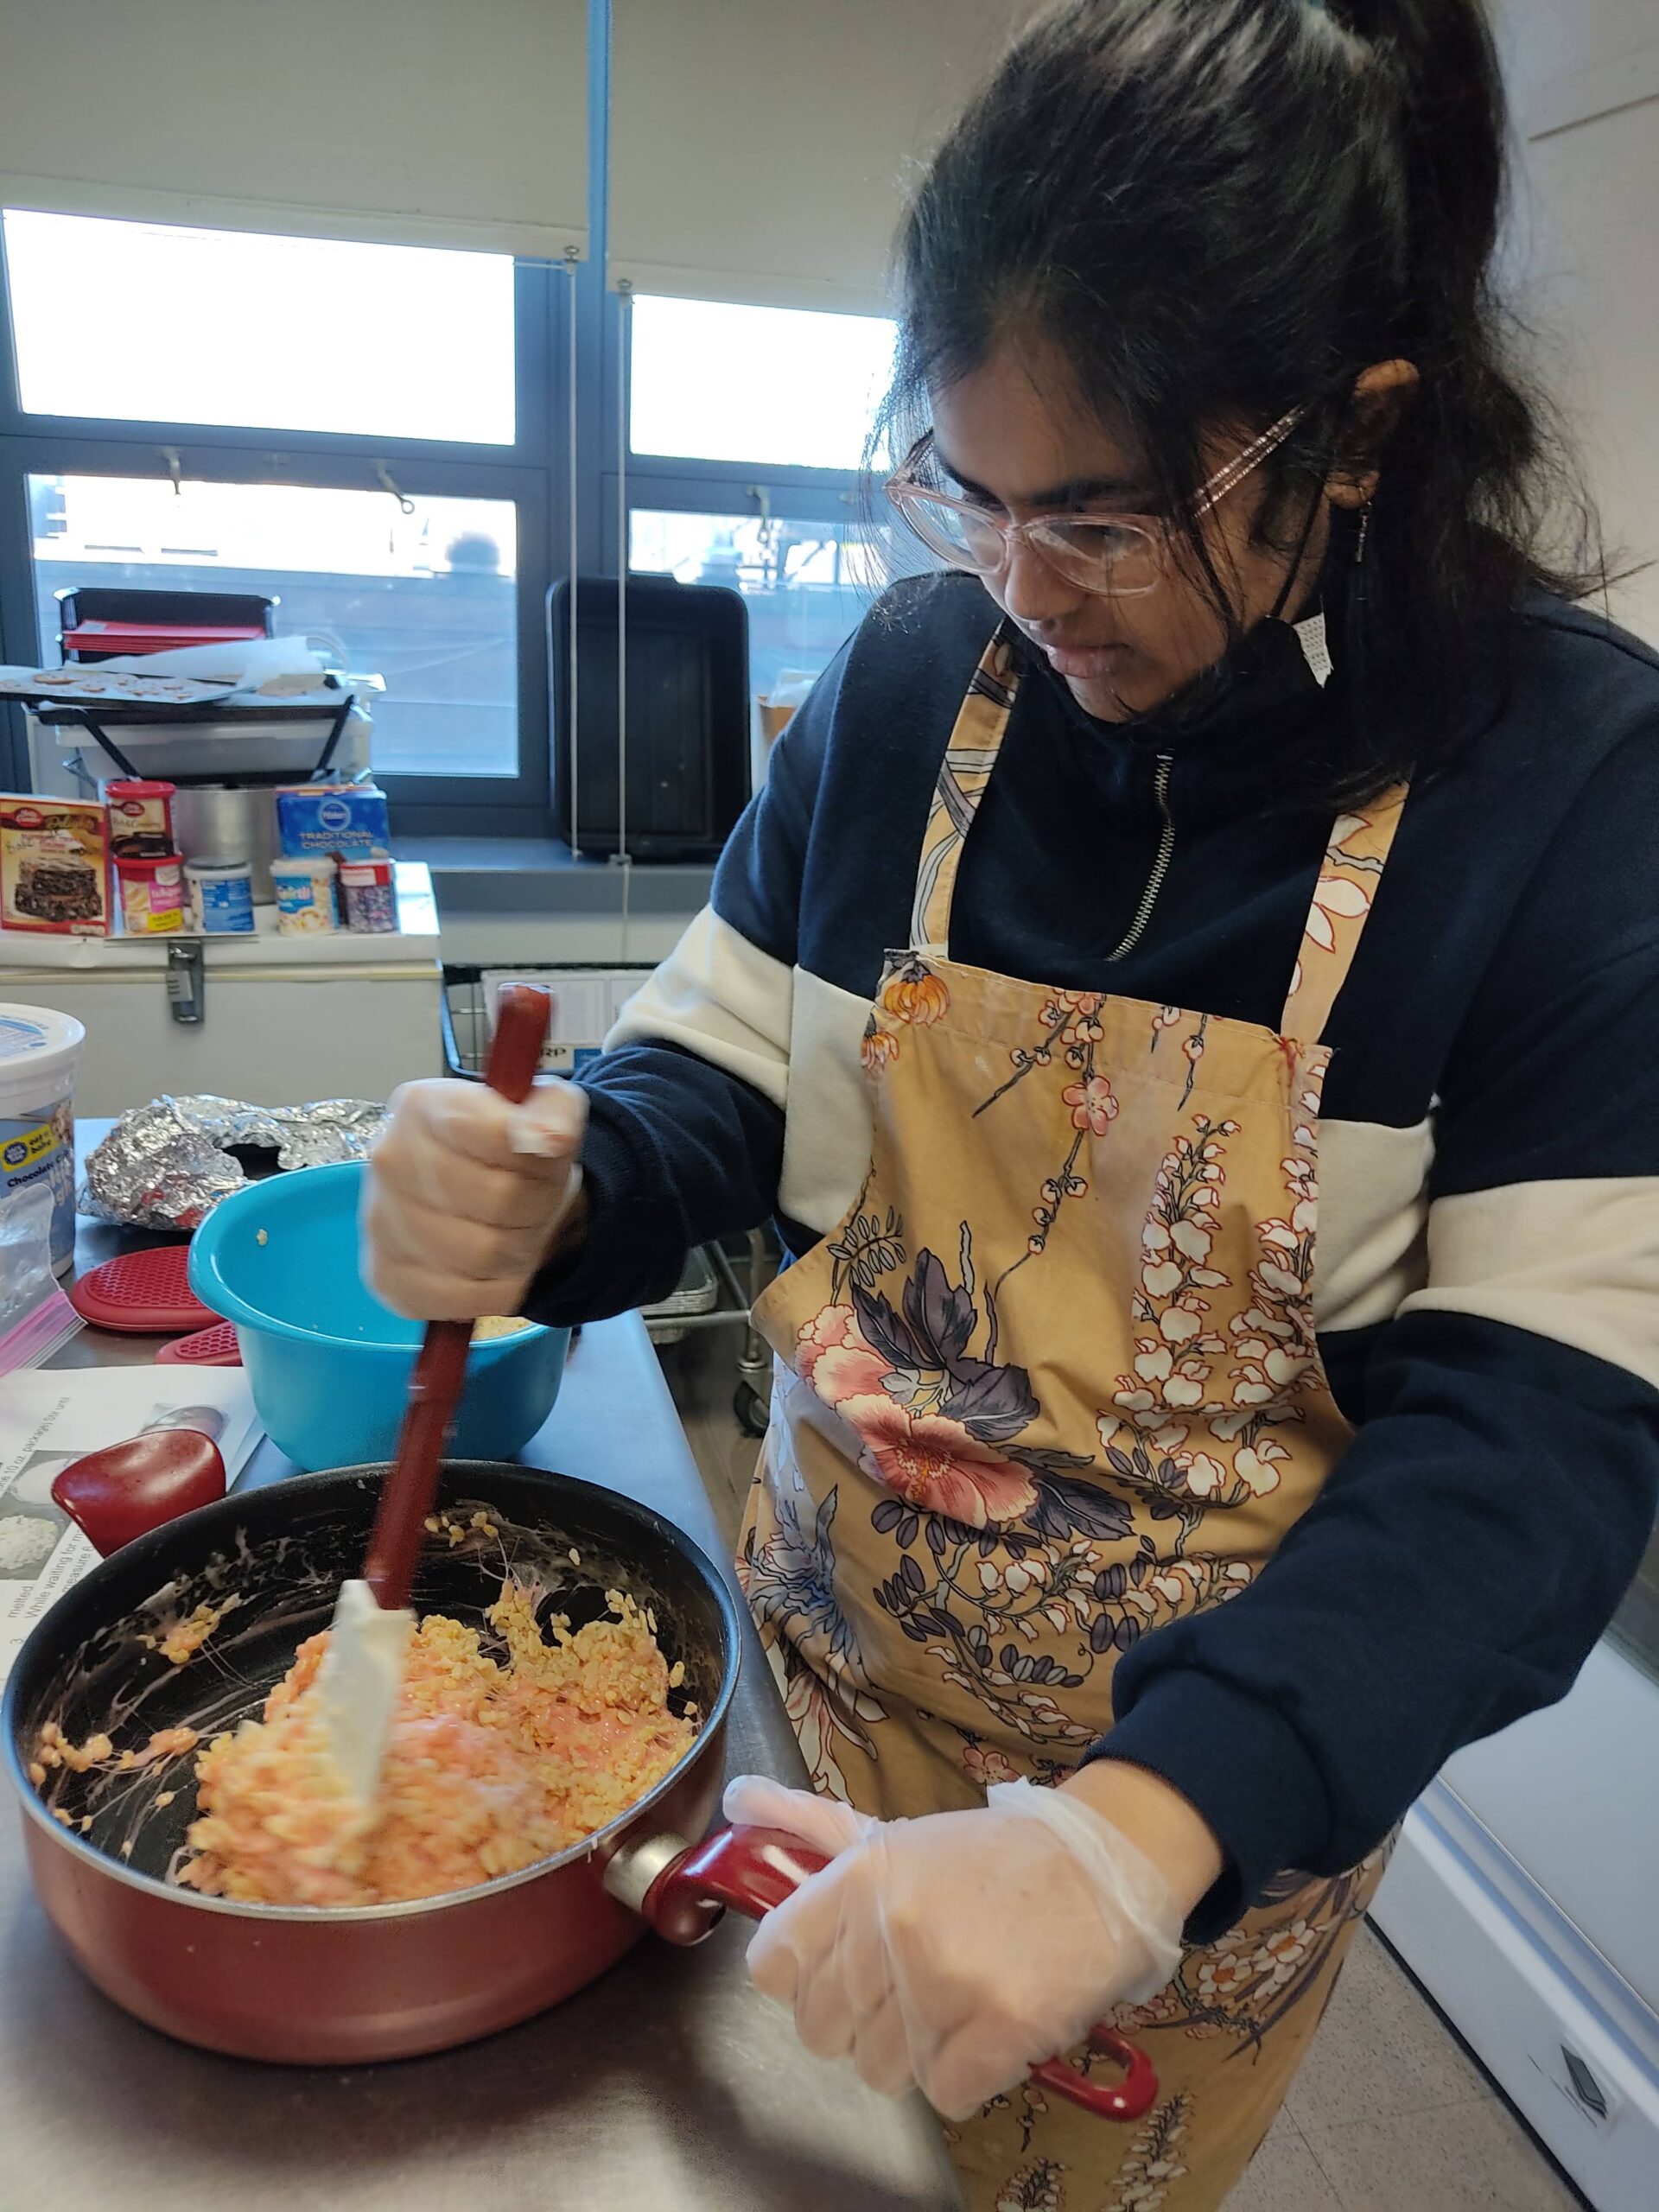 A female student wearing an apron using a spatula to cook food in a frying pan.